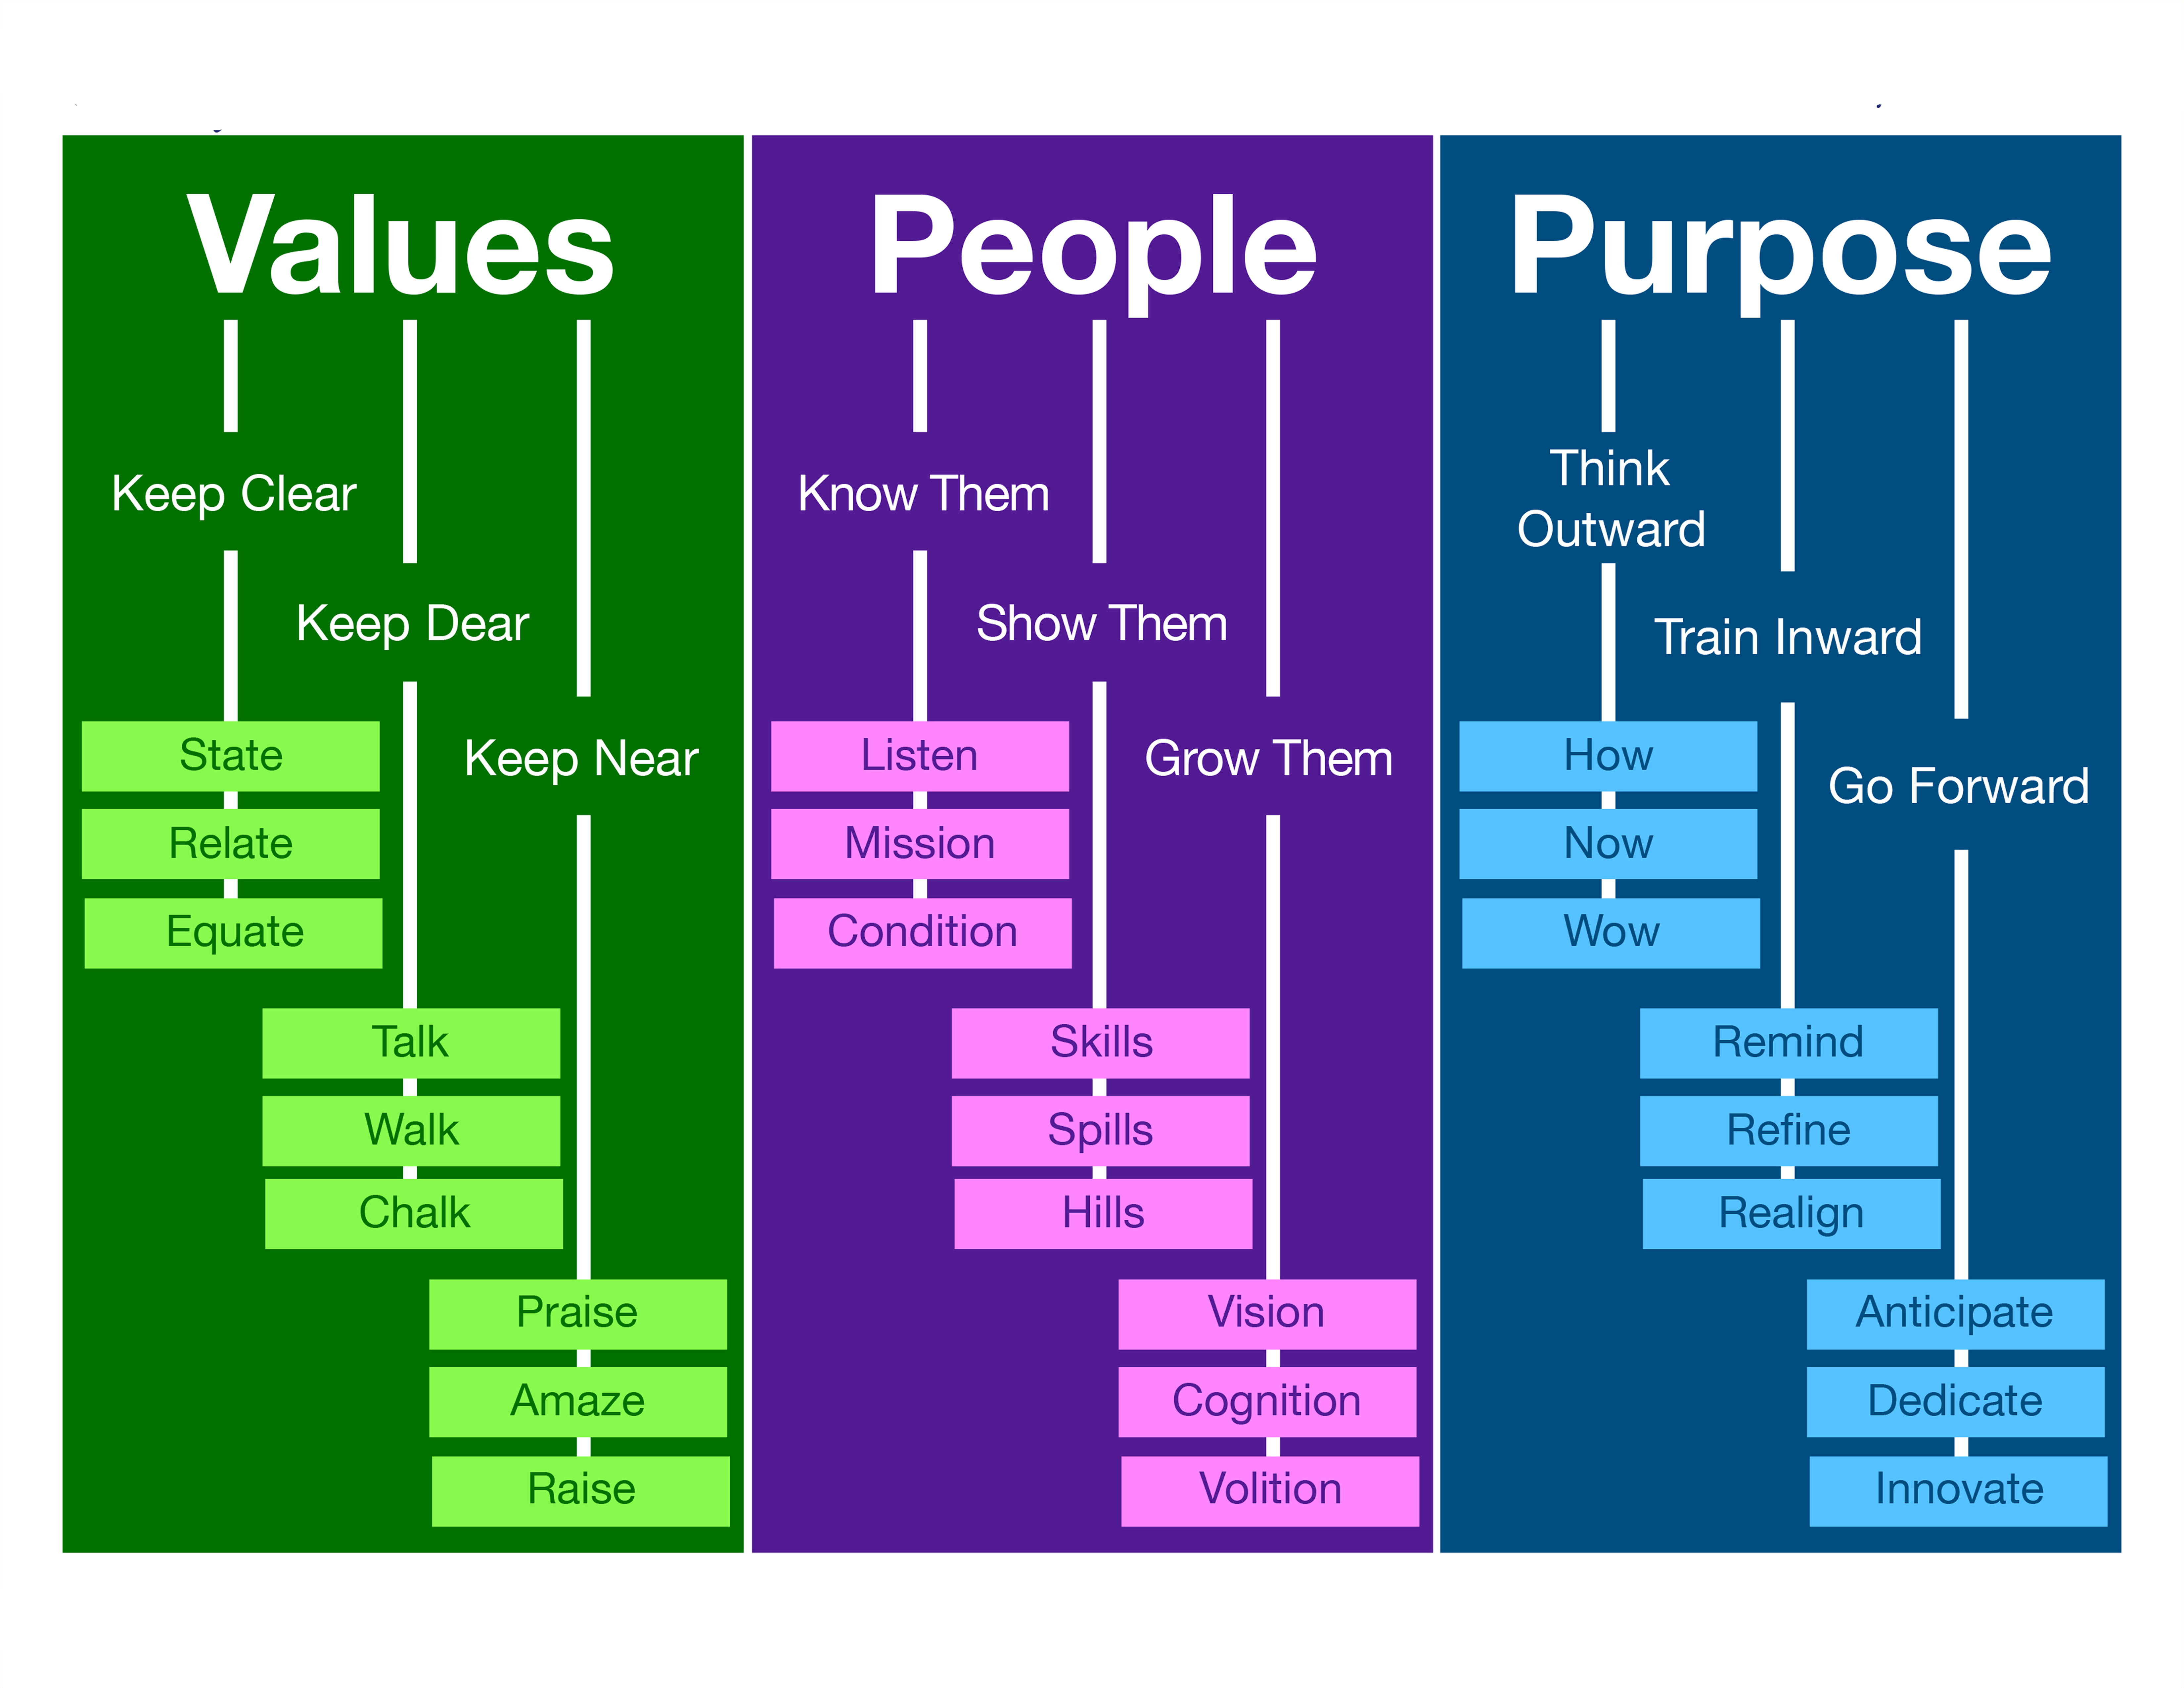 How To Create A Growth Culture, leveraging values, growing people, fulfilling purpose